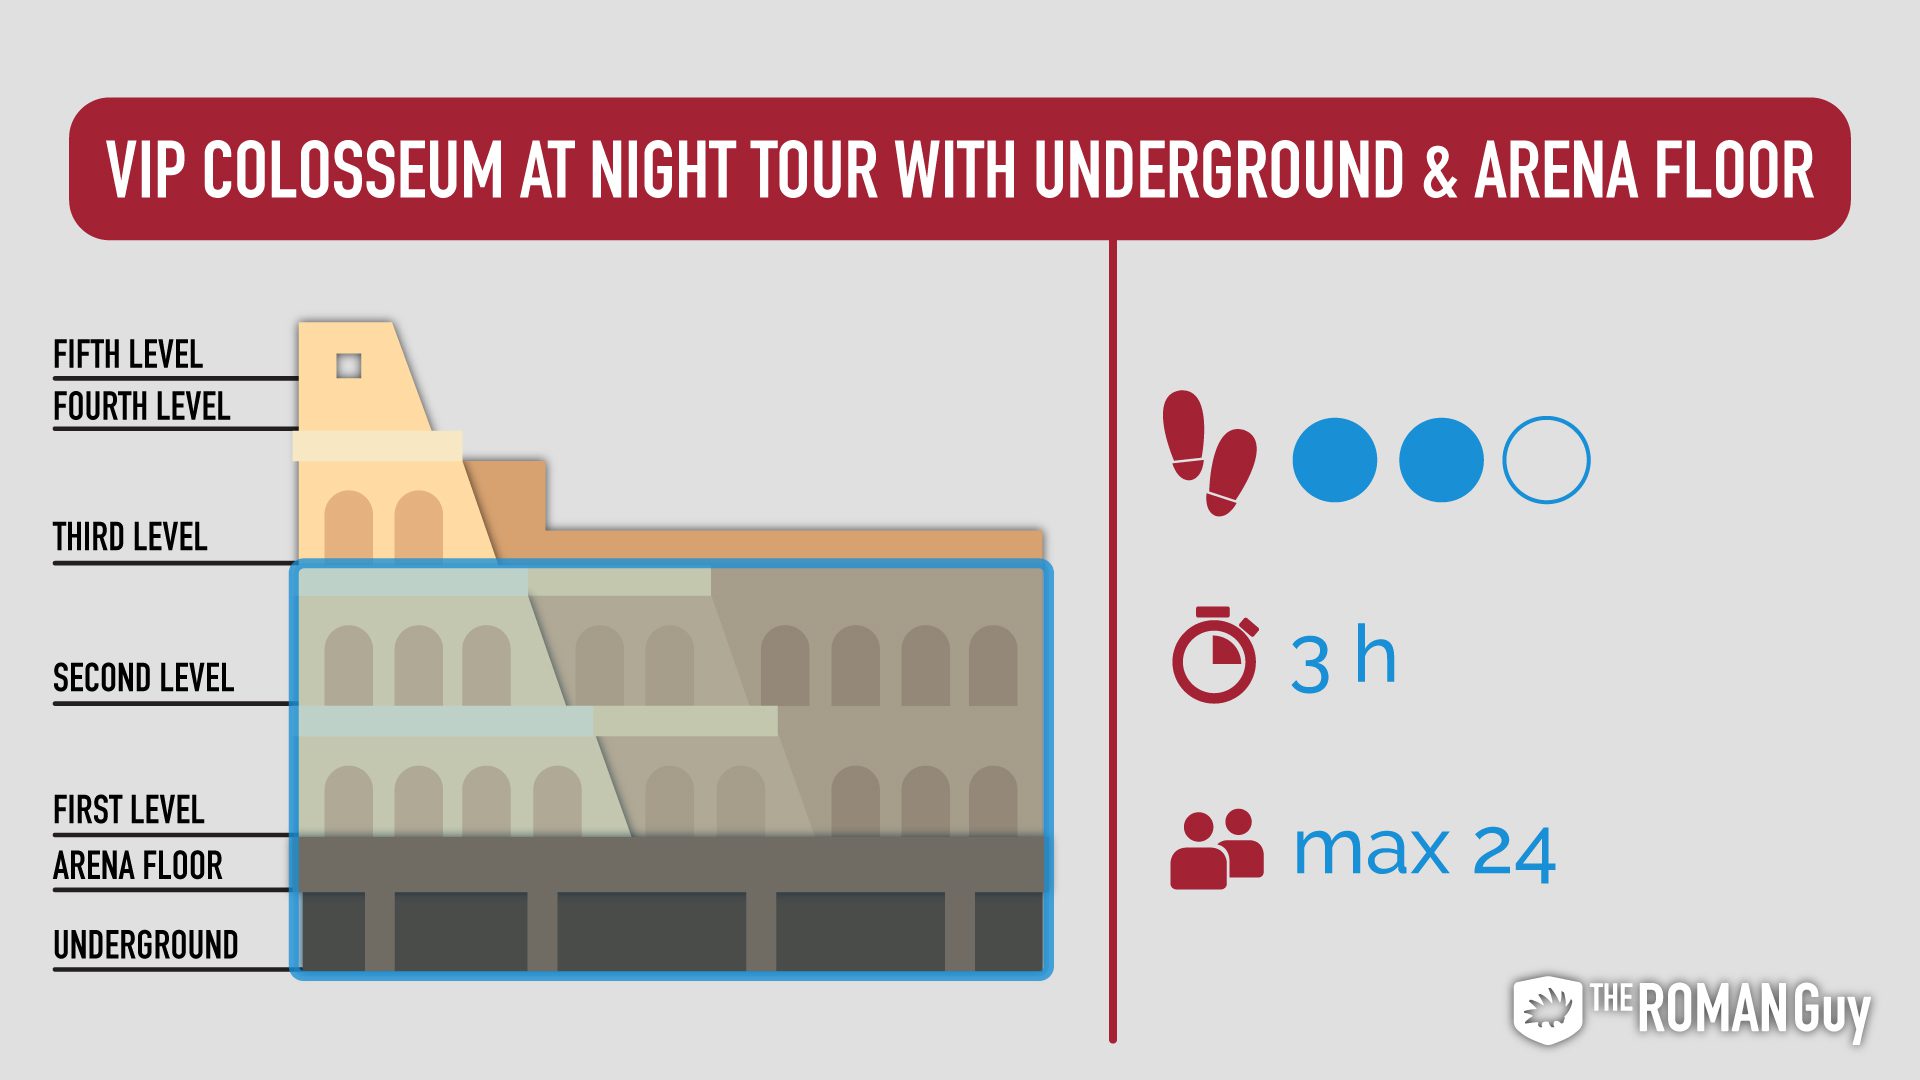 VIP Colosseum at Night Tour with Underground and Arena Floor - The Roman Guy